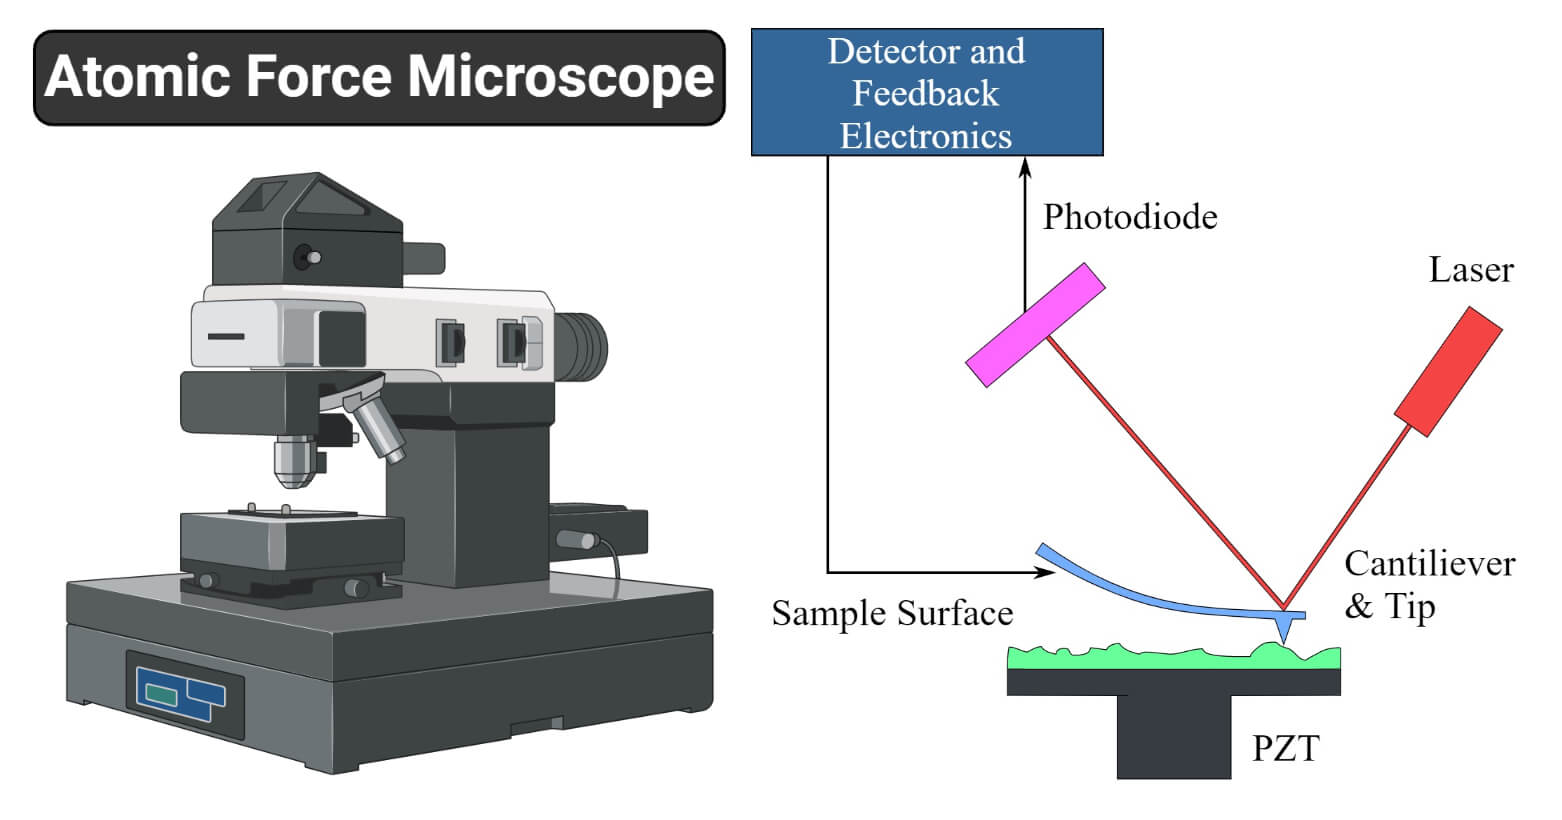 Atomic Force Microscope (ATM)